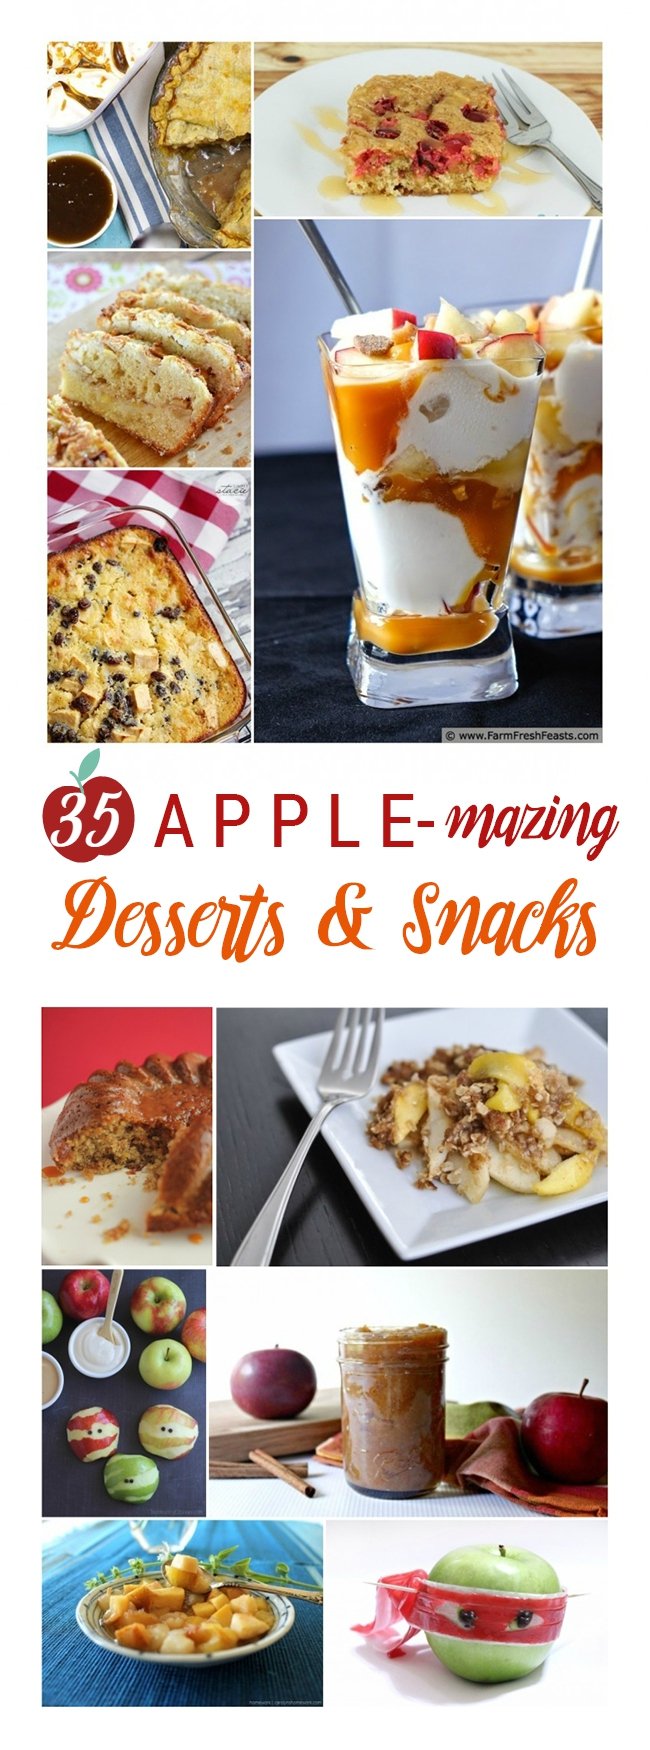 Say yes to apples this year. They'll never go bad when you have these amazing apple desserts & snacks on your list. #1 sounds AMAZING!